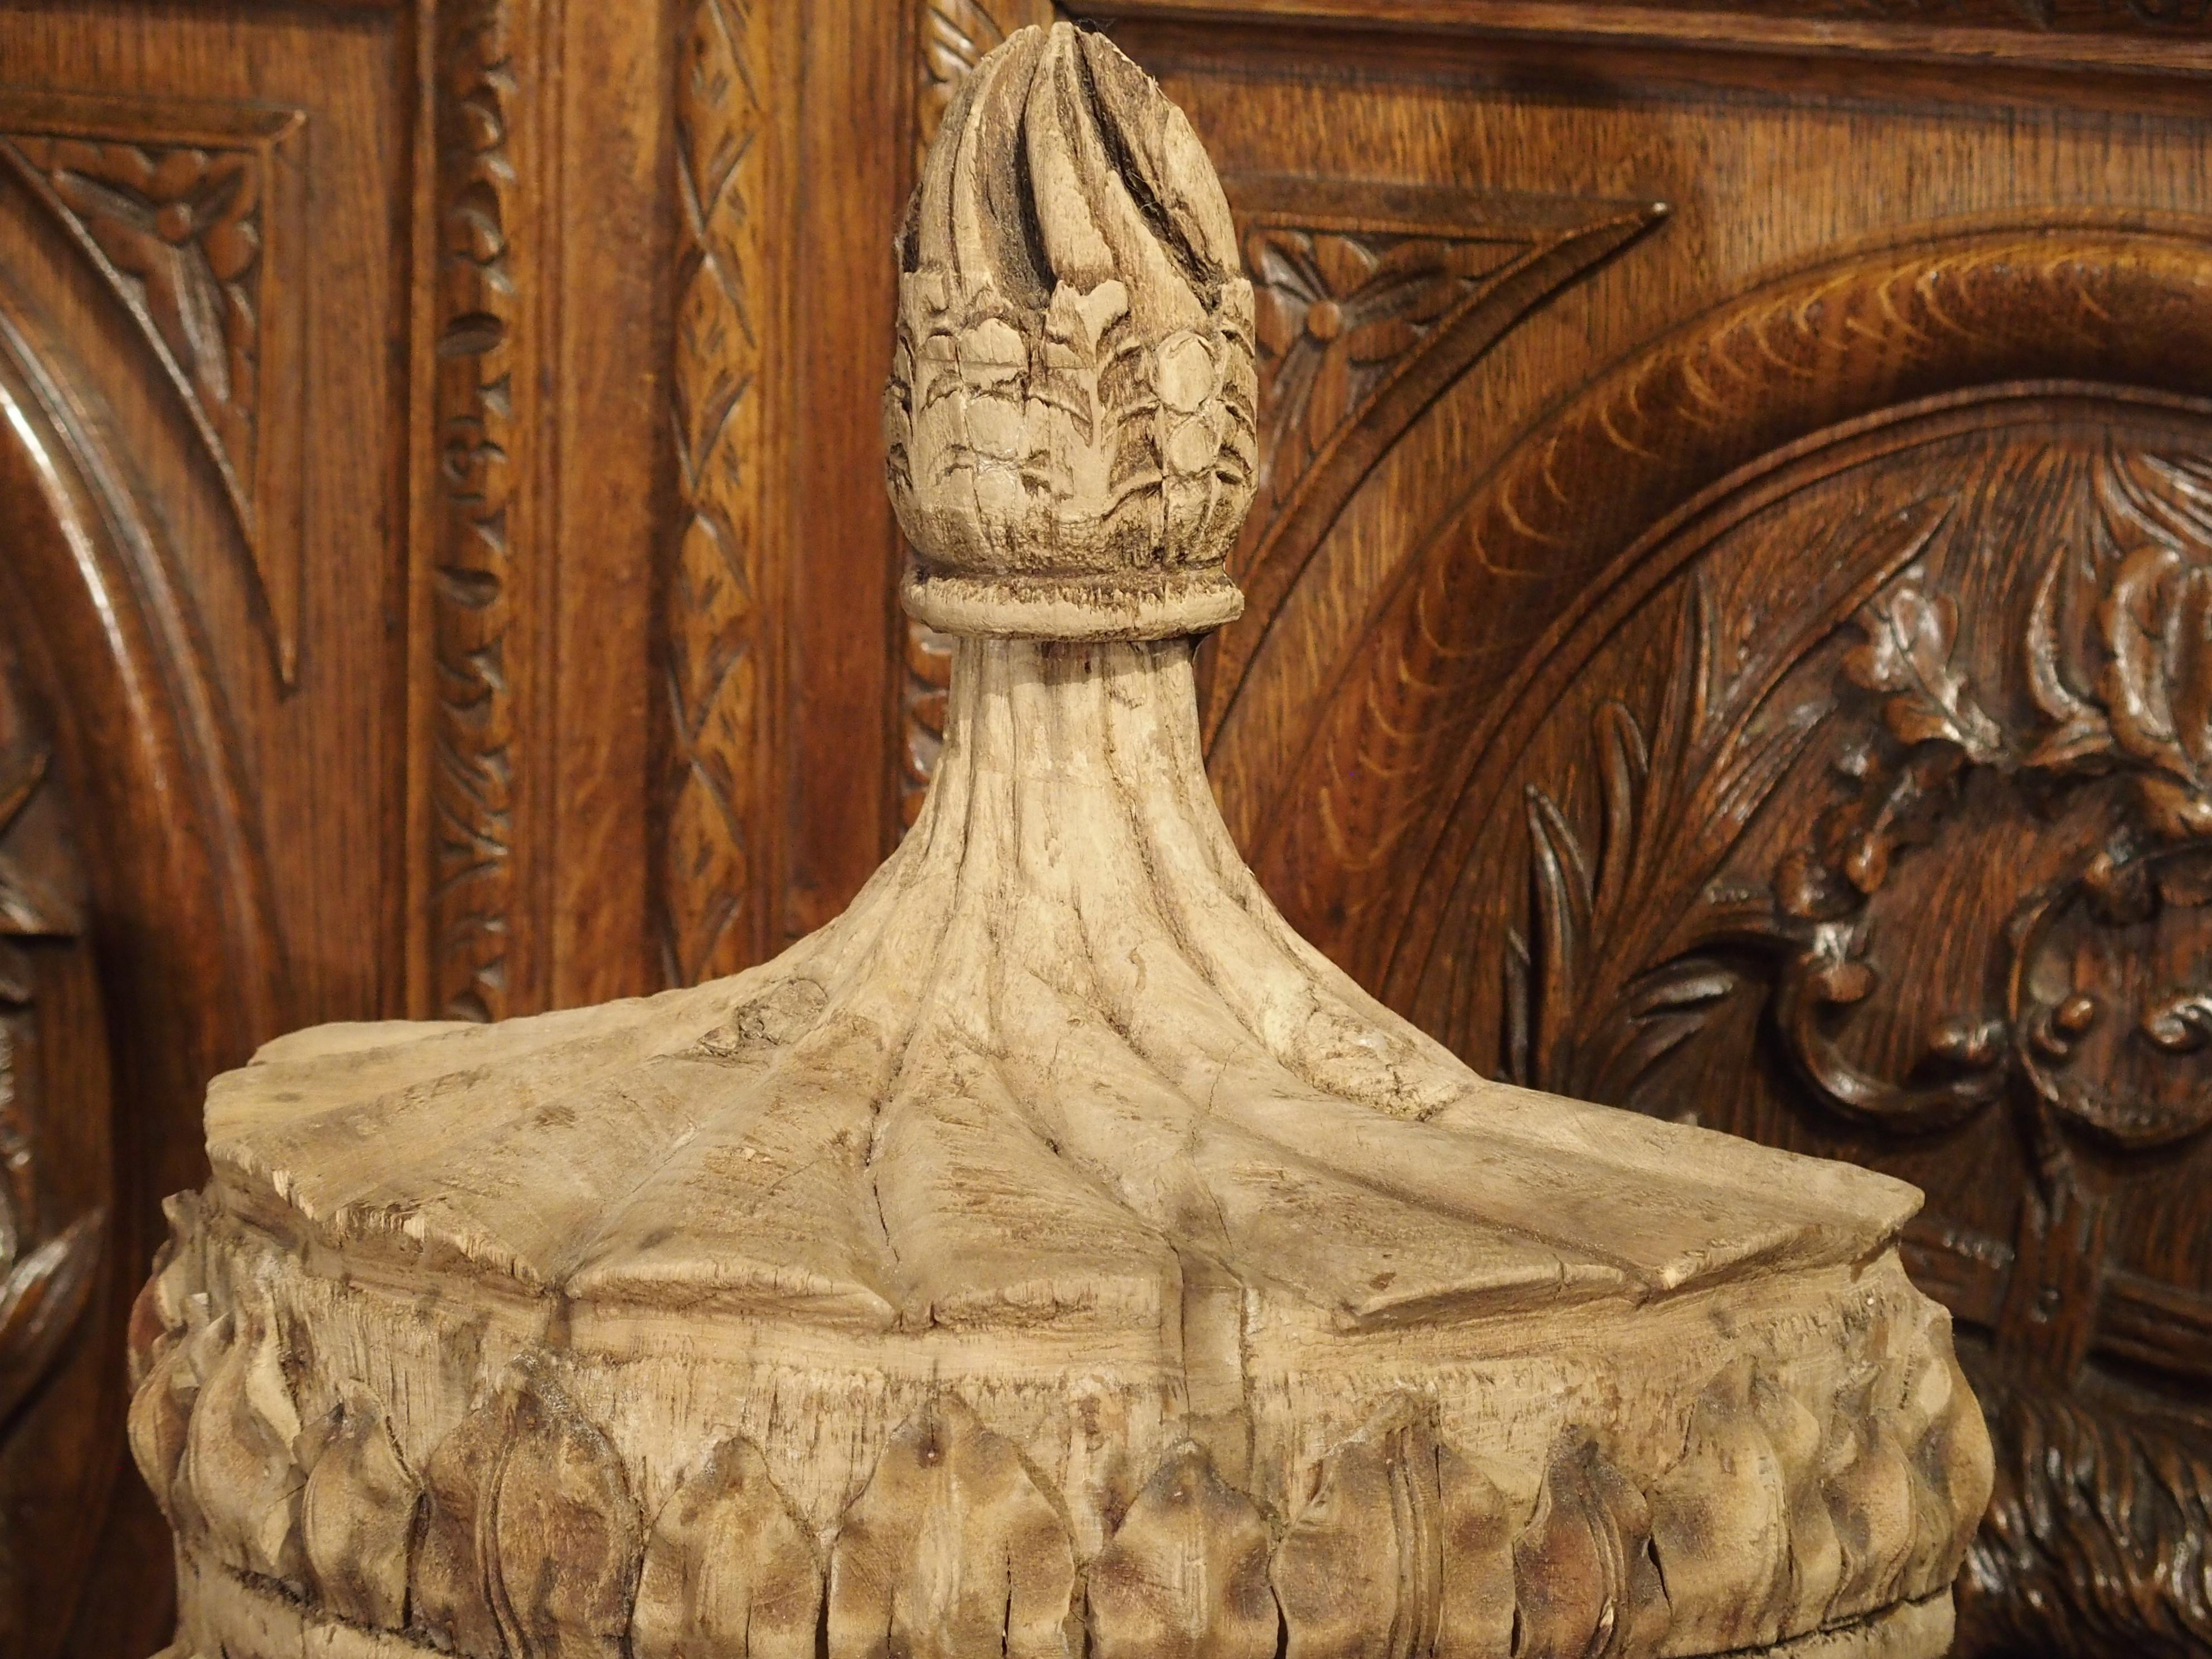 These elegant hand carved, wooden half urns are in the neoclassical style of England. The main theme of these half urns is the display of foliate motifs, with the encircled stylized sunflowers being the only exception. Separate, larger leaves have